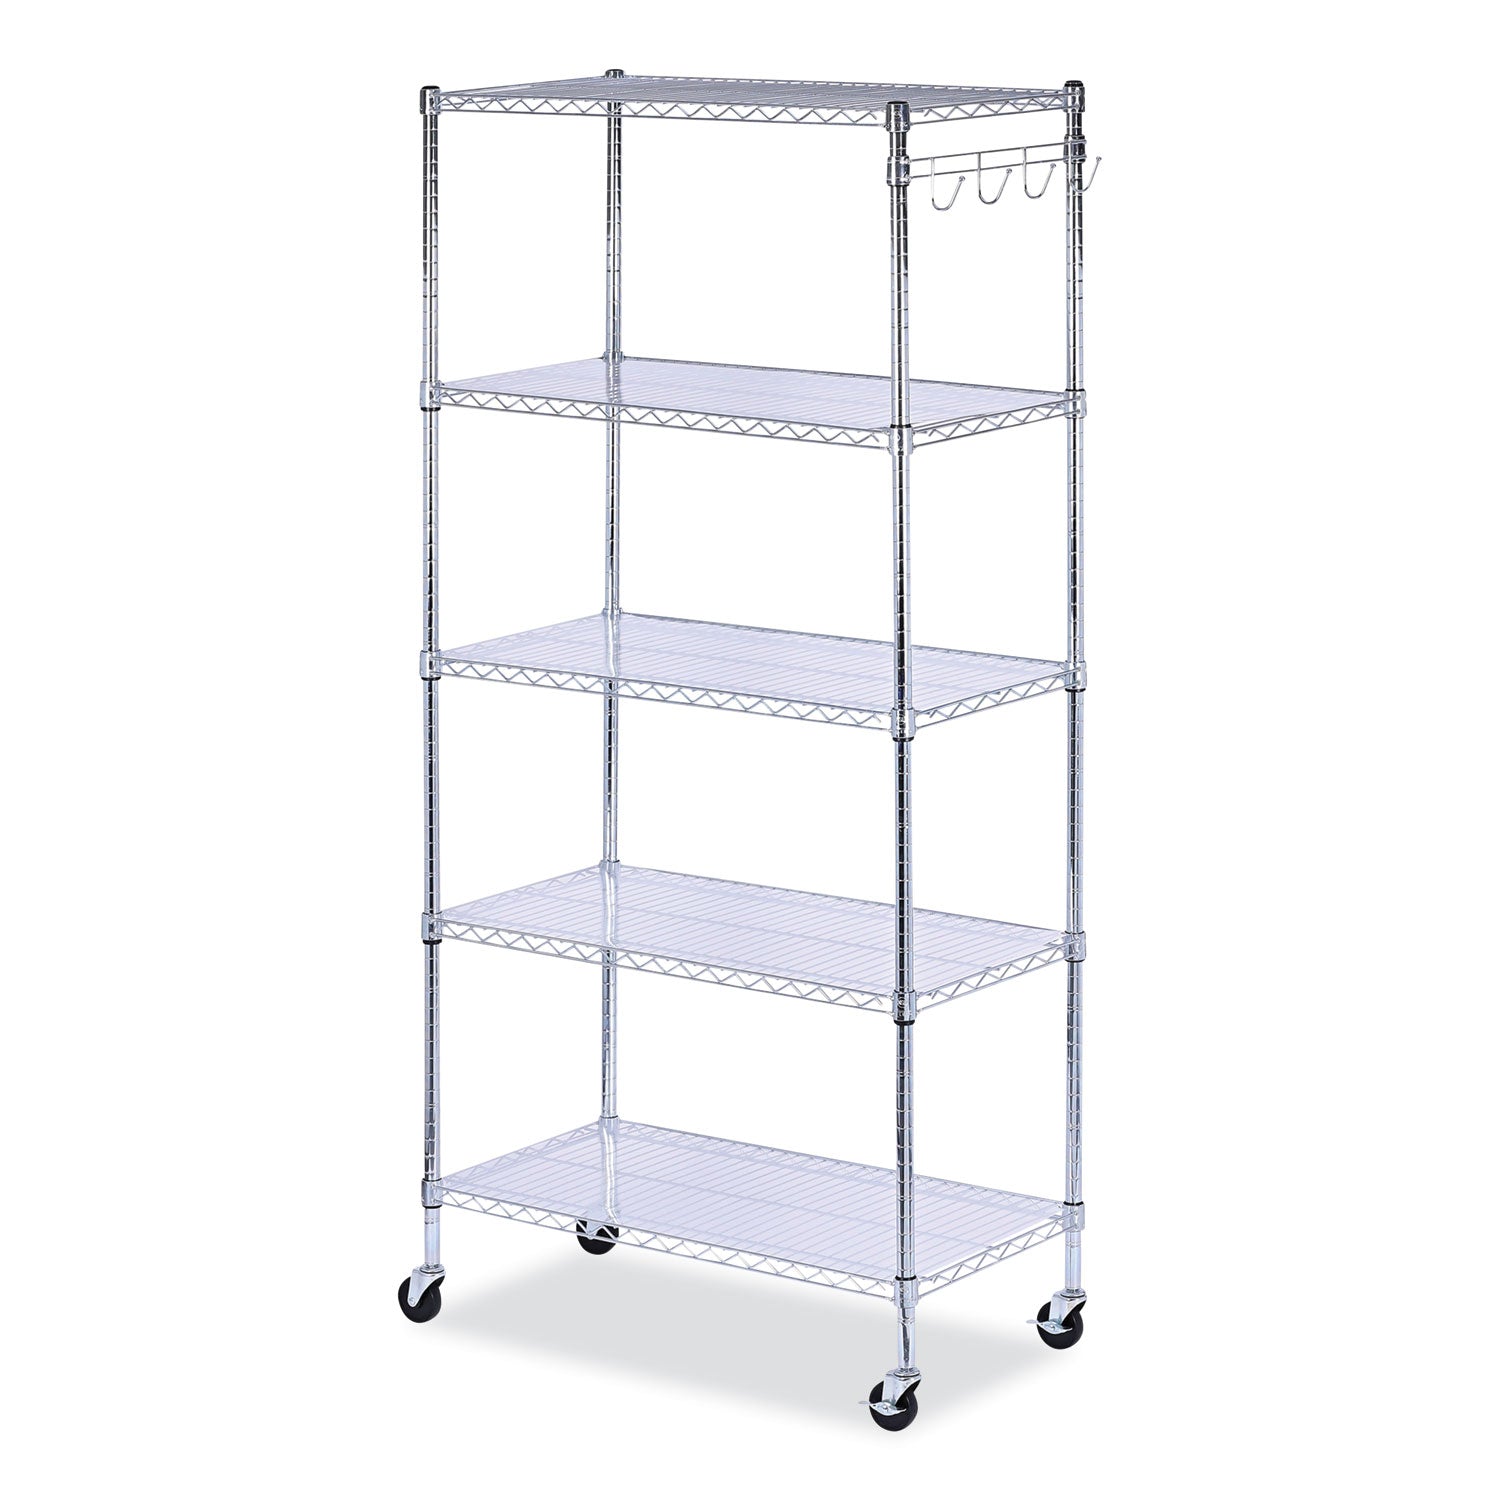 5-shelf-wire-shelving-kit-with-casters-and-shelf-liners-36w-x-18d-x-72h-silver_alesw653618sr - 1